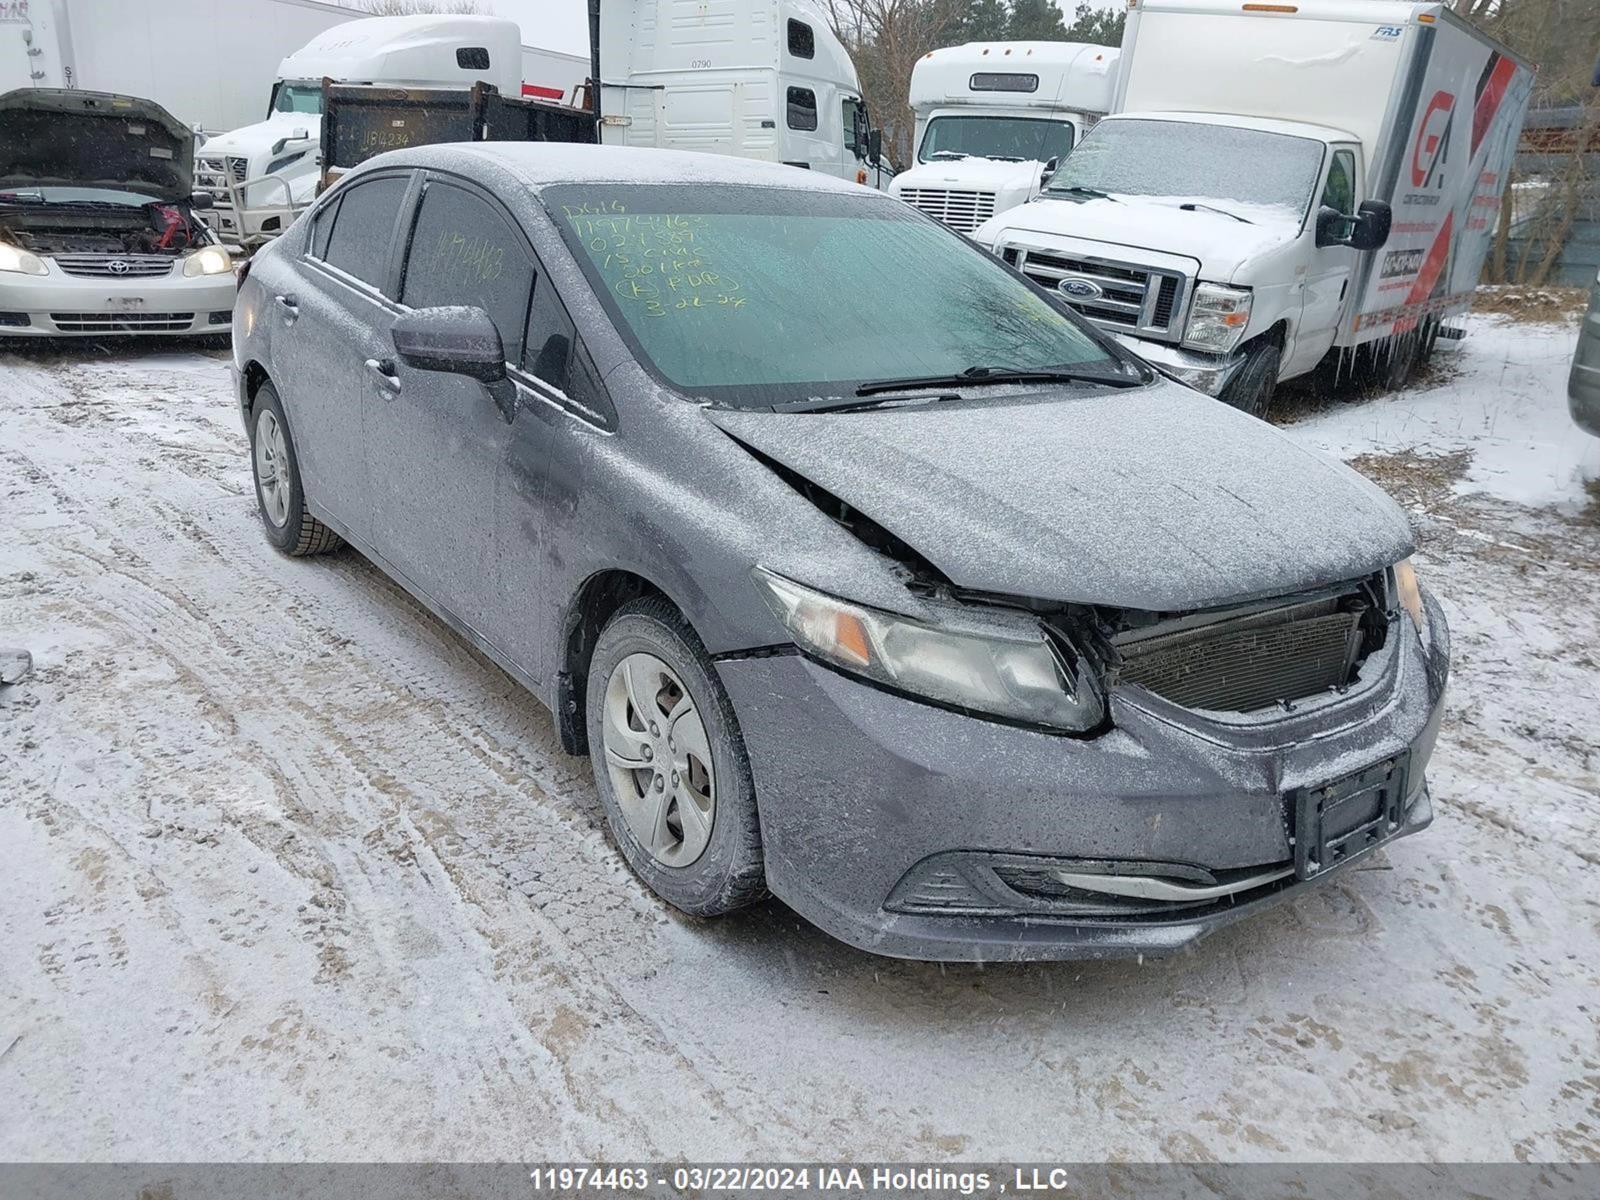 vin: 2HGFB2F45FH024889 2HGFB2F45FH024889 2015 honda civic 1800 for Sale in l4a7x4, 16505 Hwy 48 , Stouffville, Ontario, Canada